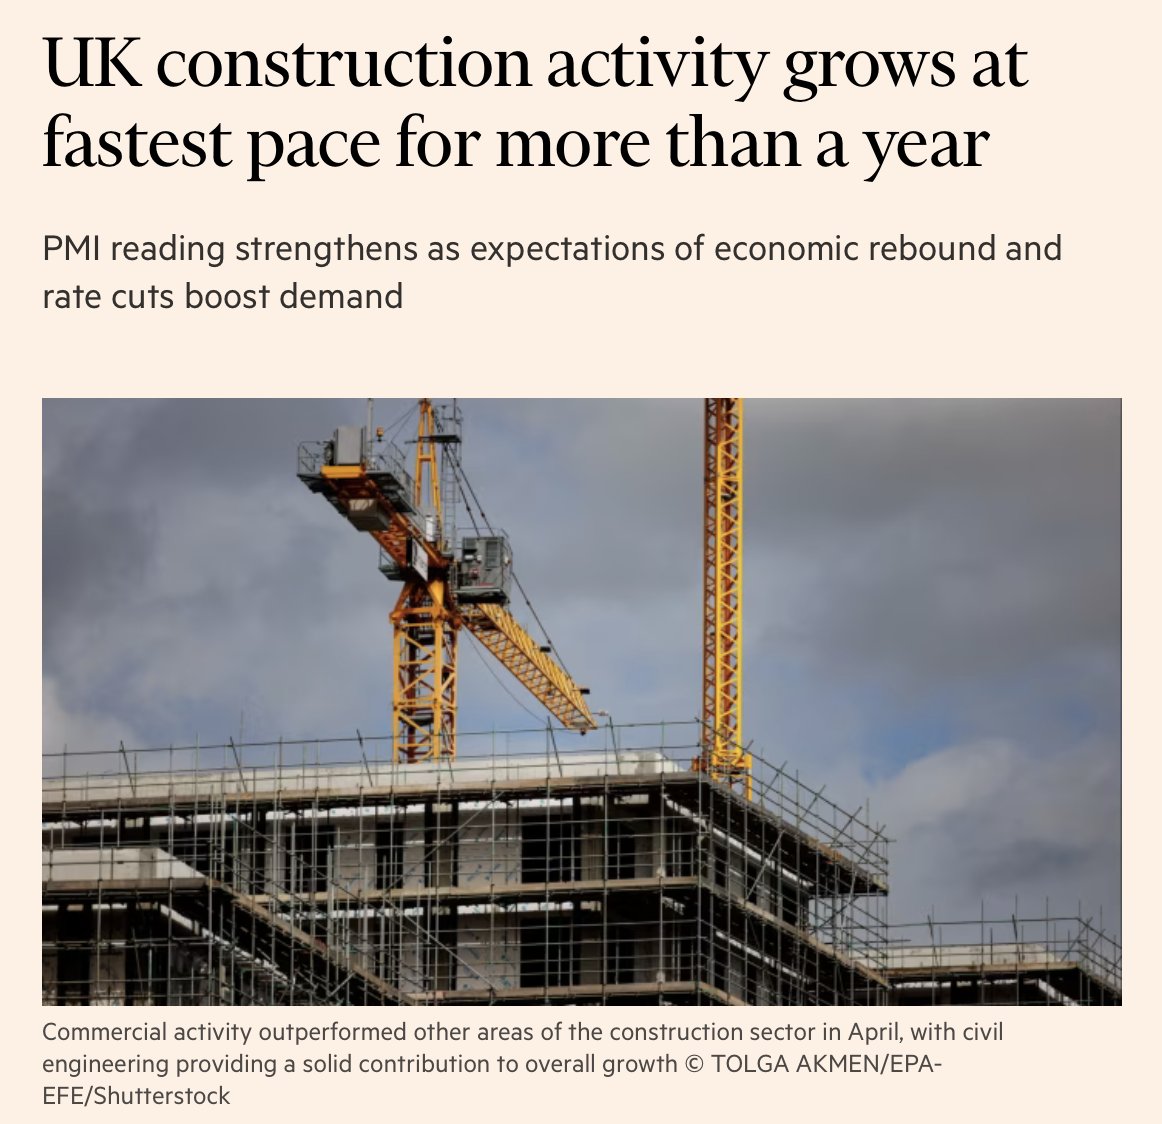 Good news on commercial constriction projects, but housebuilding still struggling